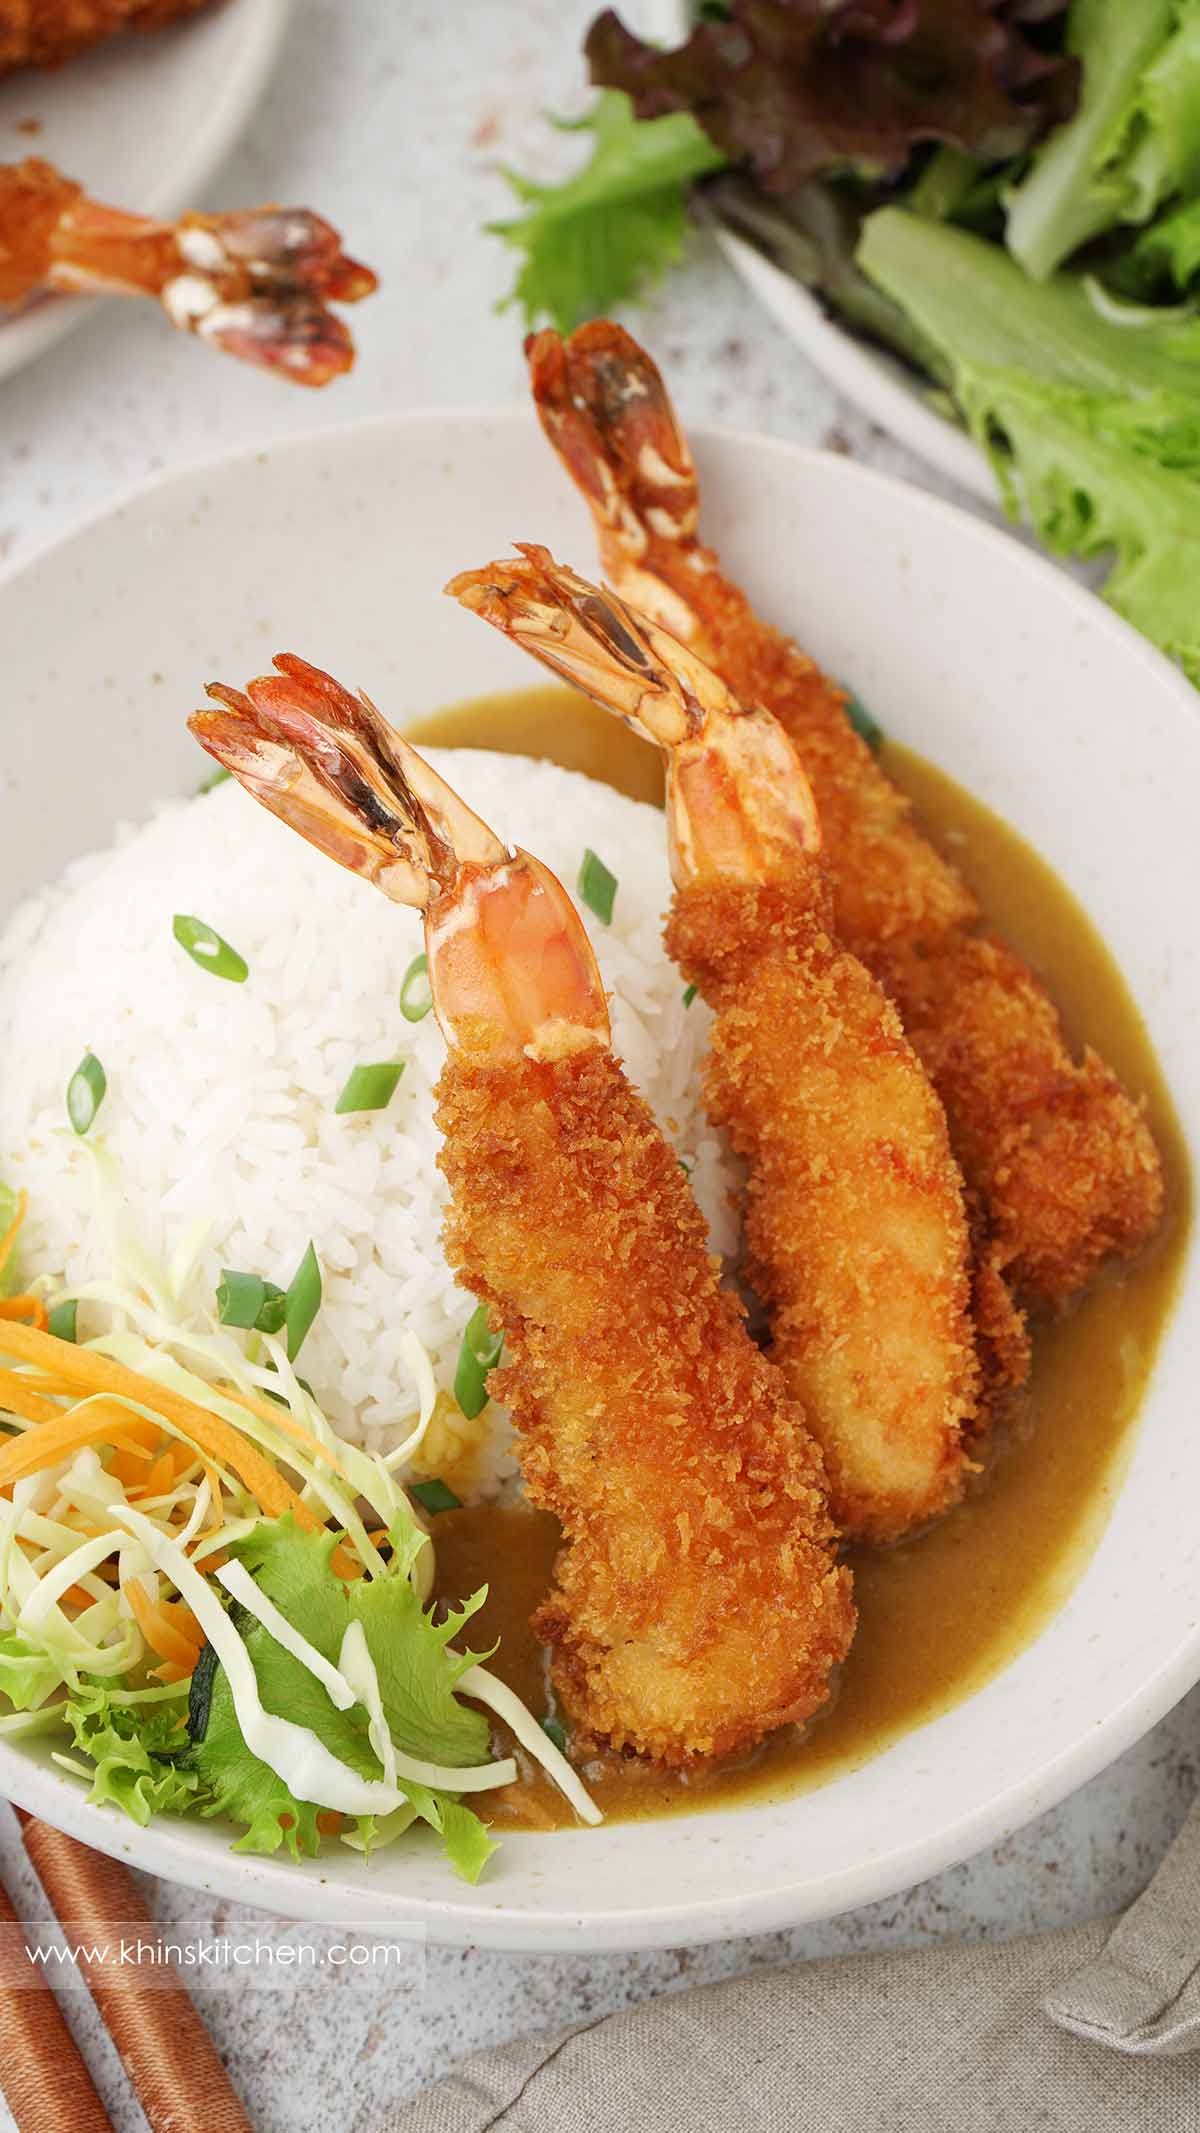 A grey bowl containing fried katsu prawns with rice and curry sauce. Shredded cabbage and carrot on the side.